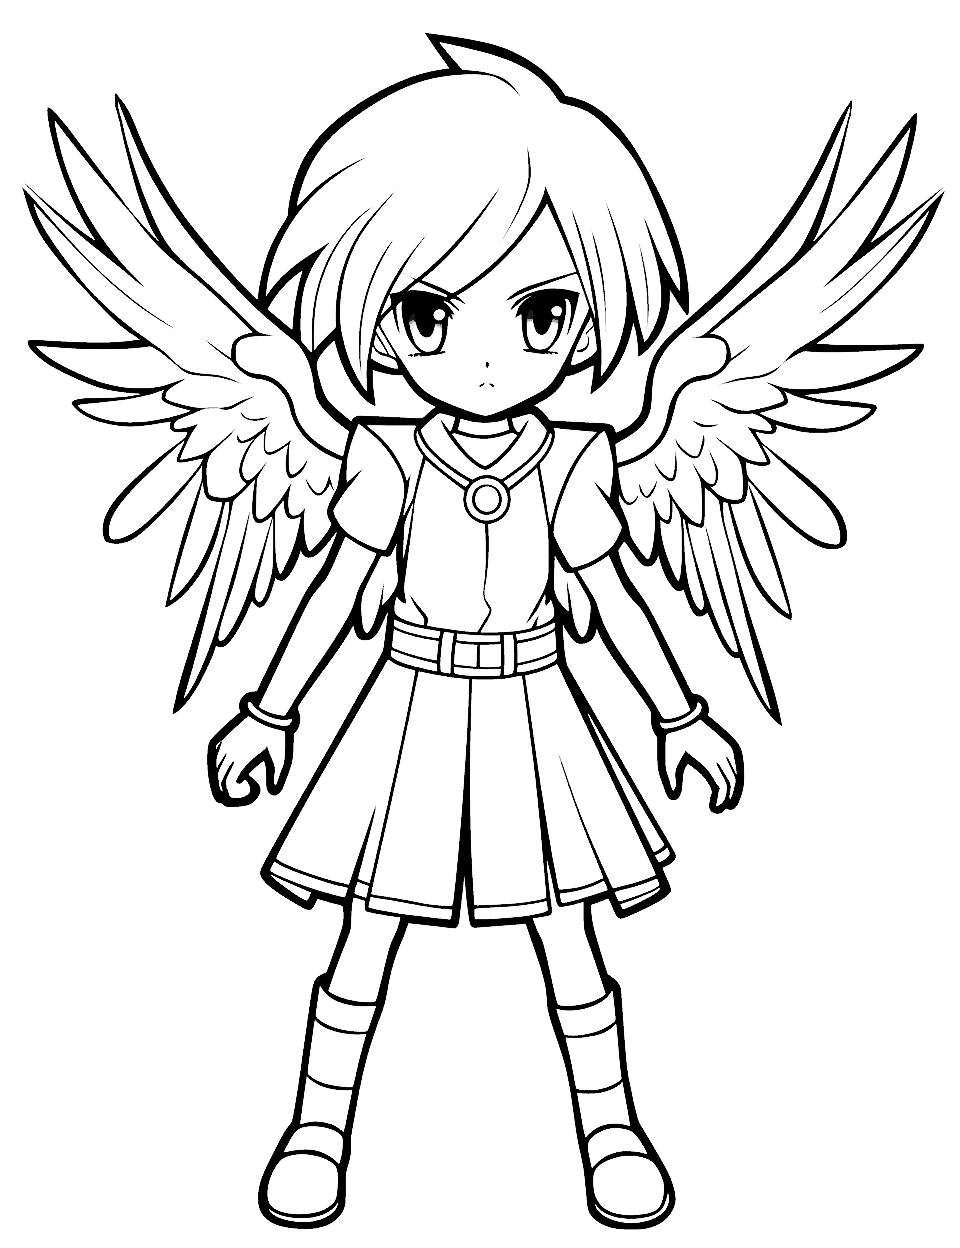 Dark Angel Anime Character Coloring Page - A dark angel anime character with beautiful wings spread wide, and an intense look in her eyes.